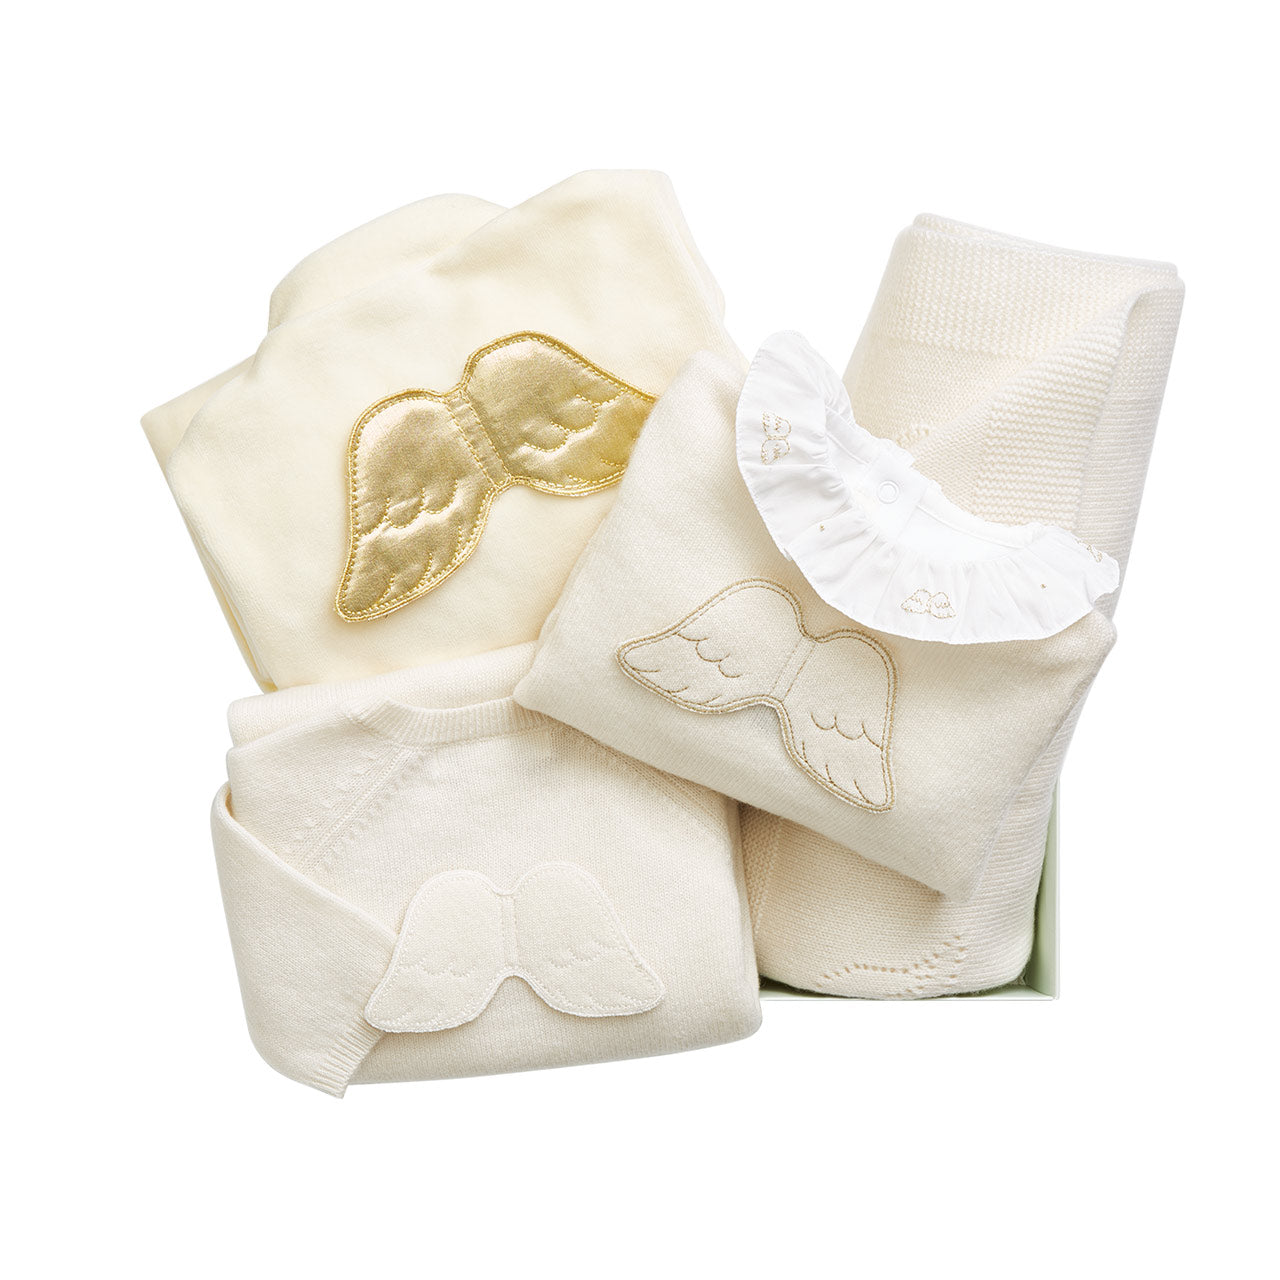 Marie Chantal Luxury Baby Gifts